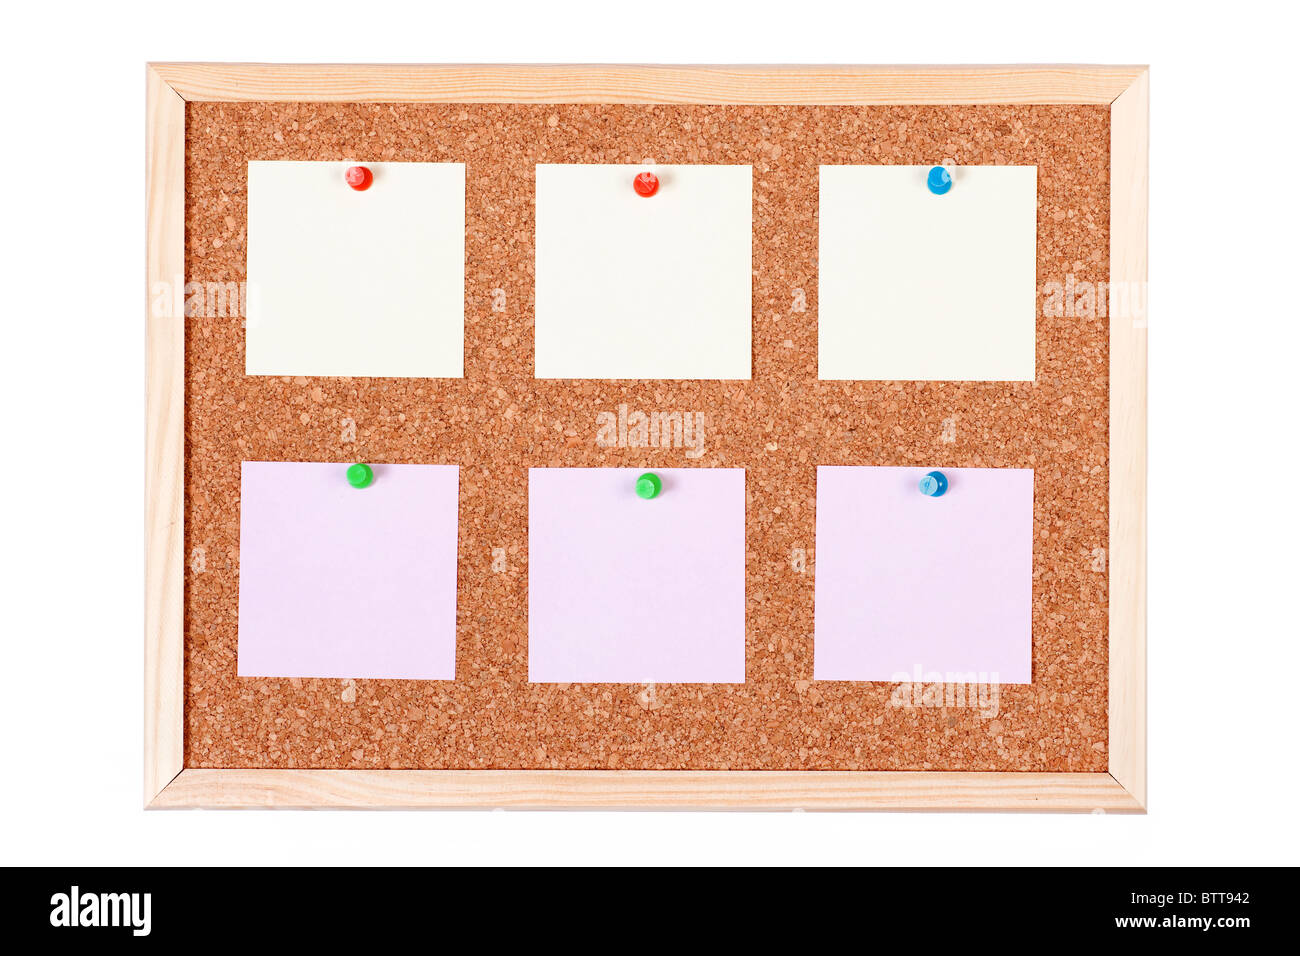 Pieces of note paper on a cork bulletin board, isolated on white background. Stock Photo